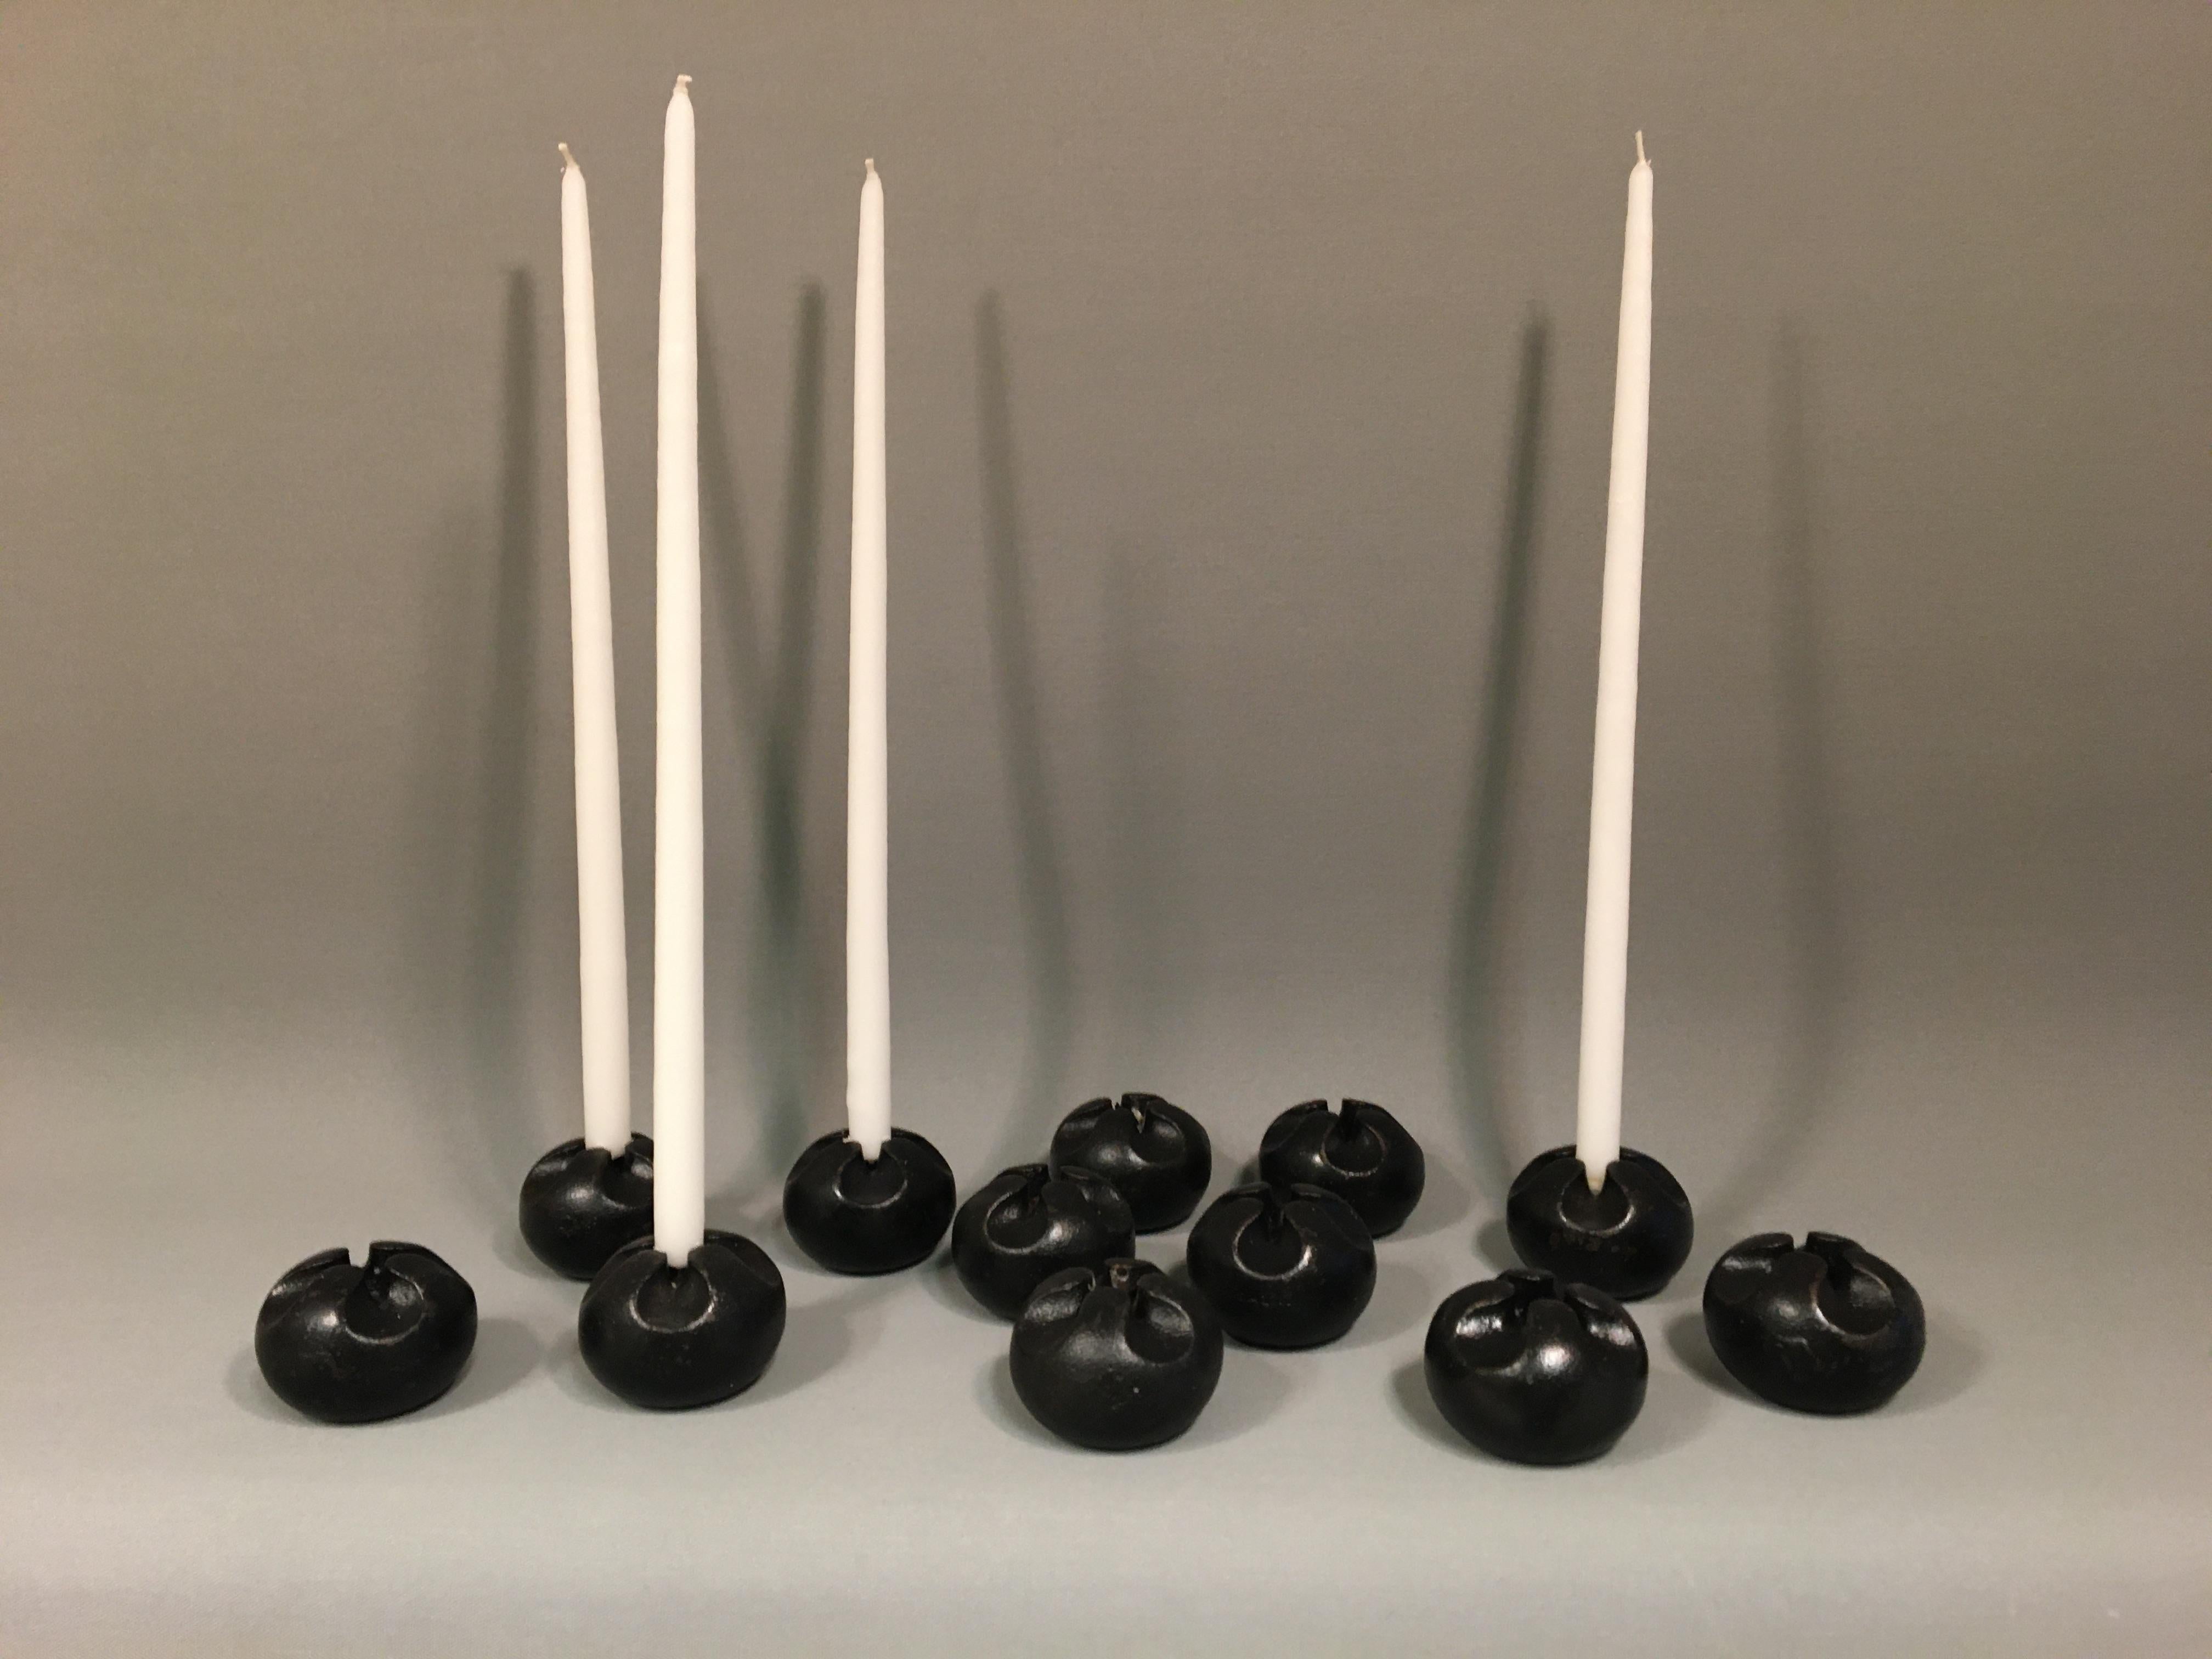 Black beautiful 'Flowerbud' candlesticks in solid cast iron.
Made into thin candles.
Design: Christel & Christer Holmgren for Illums Bolighus.
Marked Made in Denmark Pat. Pend.
Dimensions: Ø6 cm, H 4 cm.
The price is a piece.